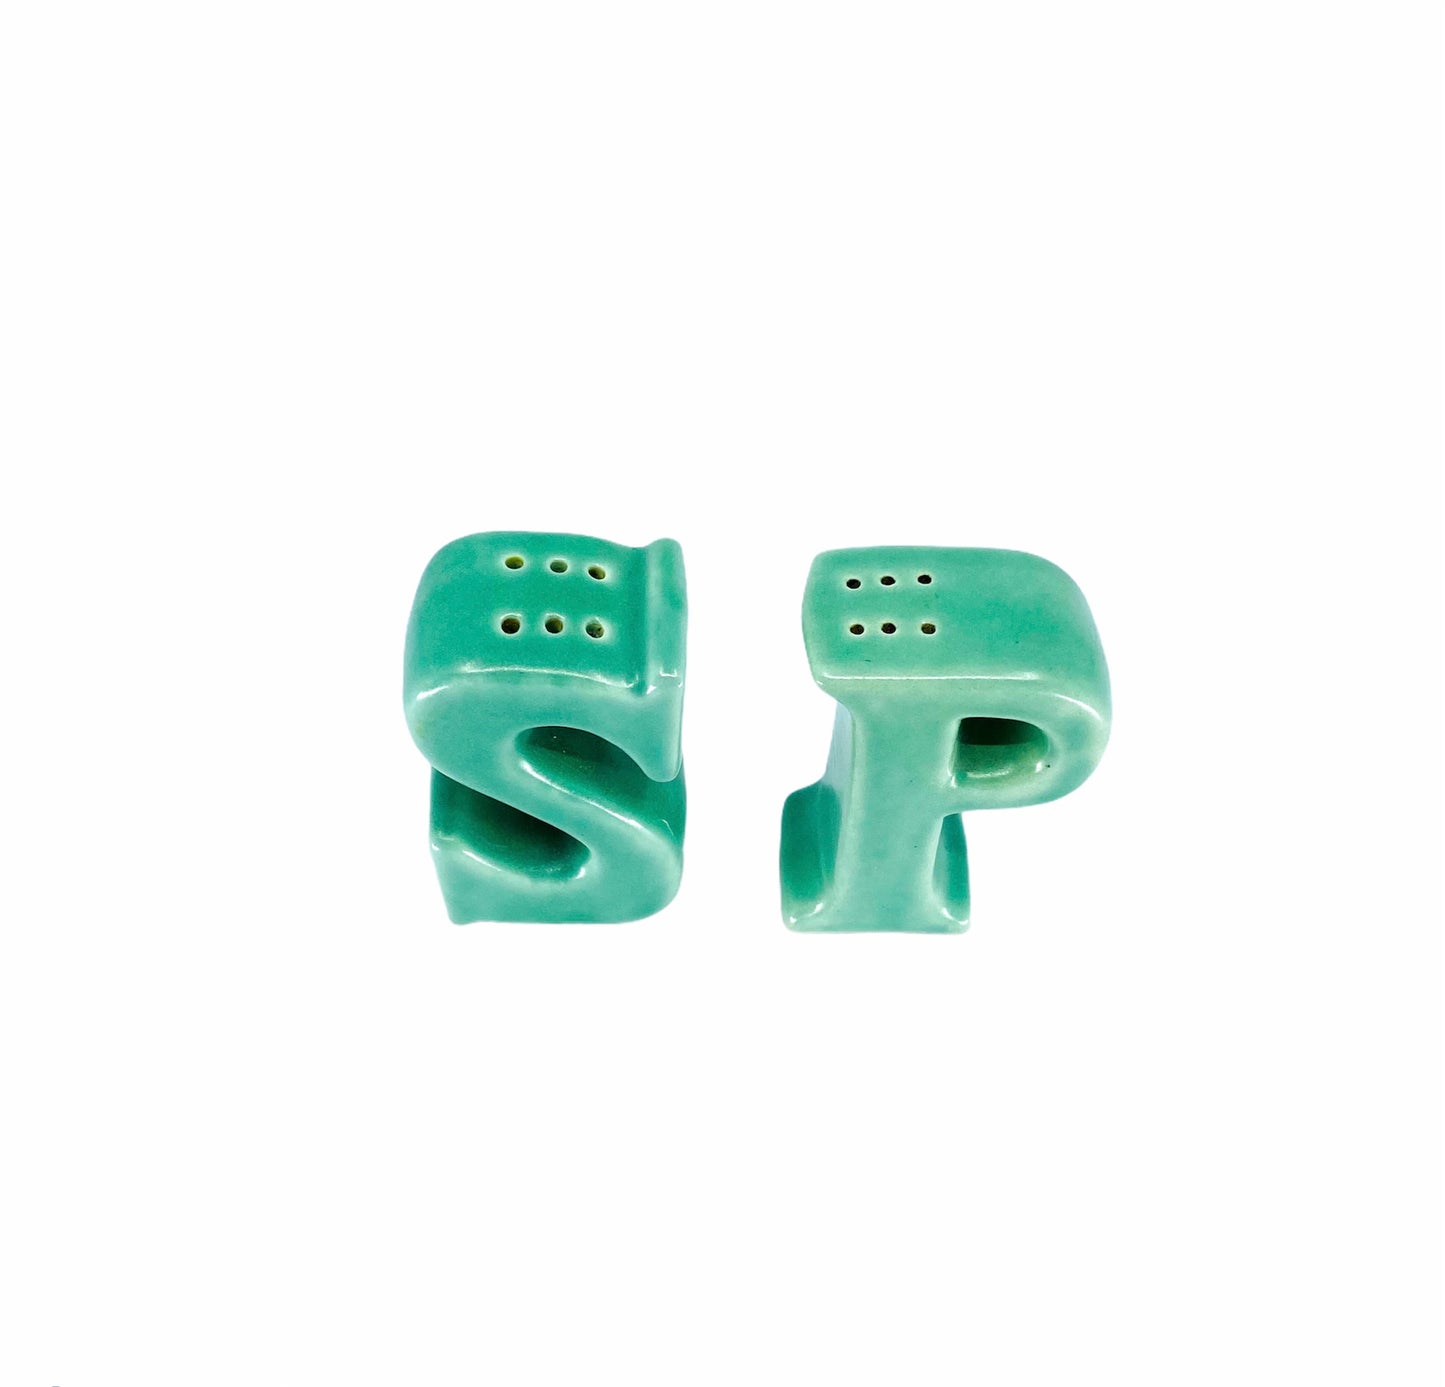 Green S & P Salt and Pepper Shakers